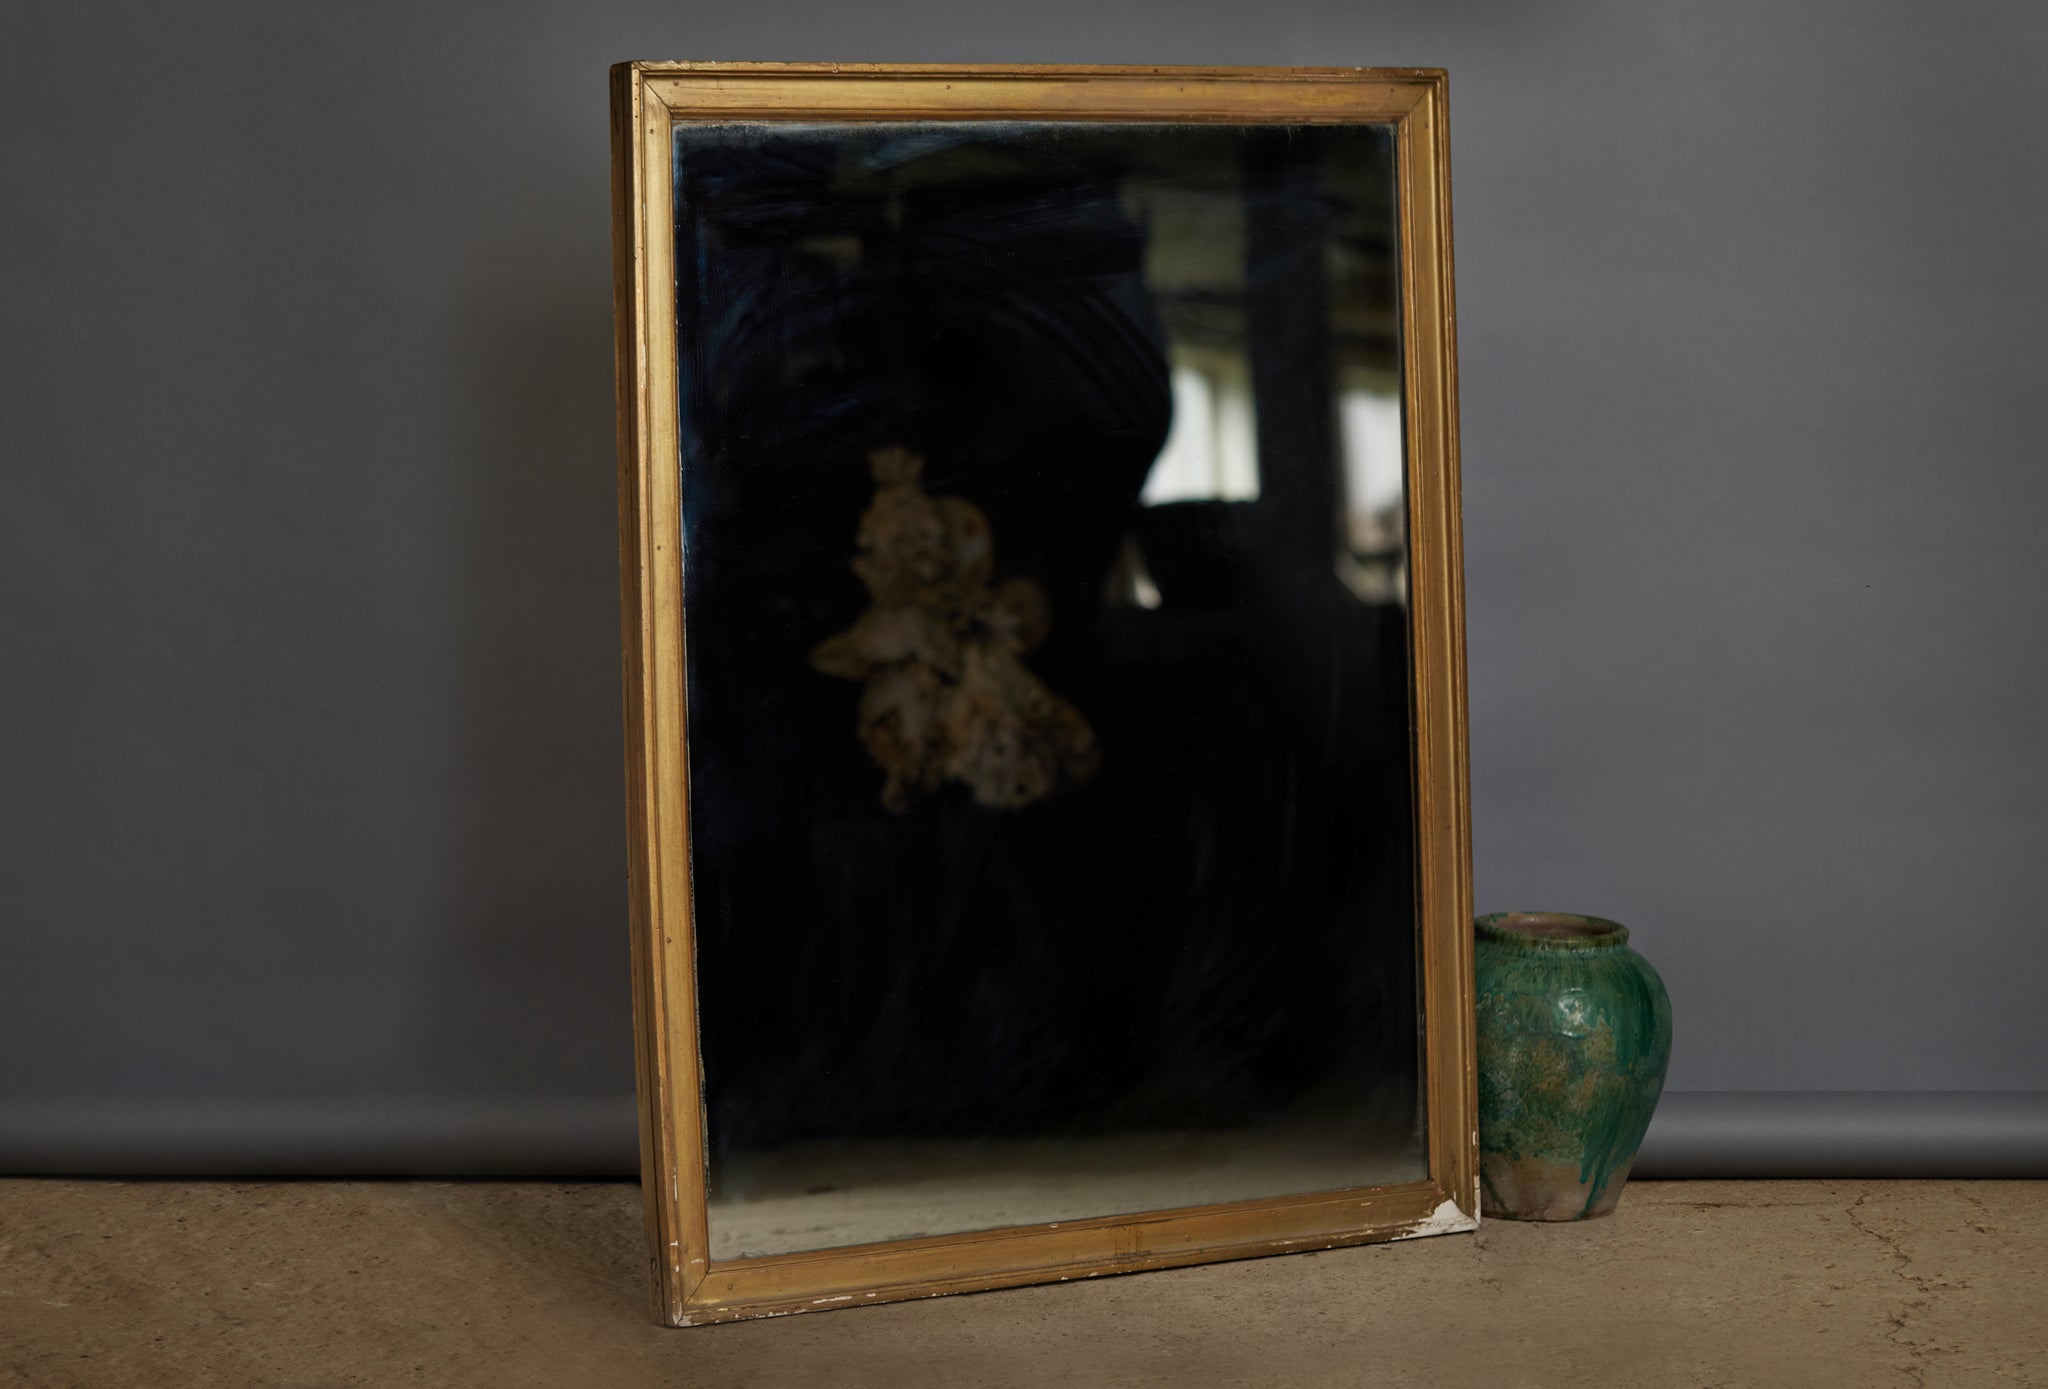 Early to Mid 19th Century French Square Gilt Frame with Original Mirror Glass